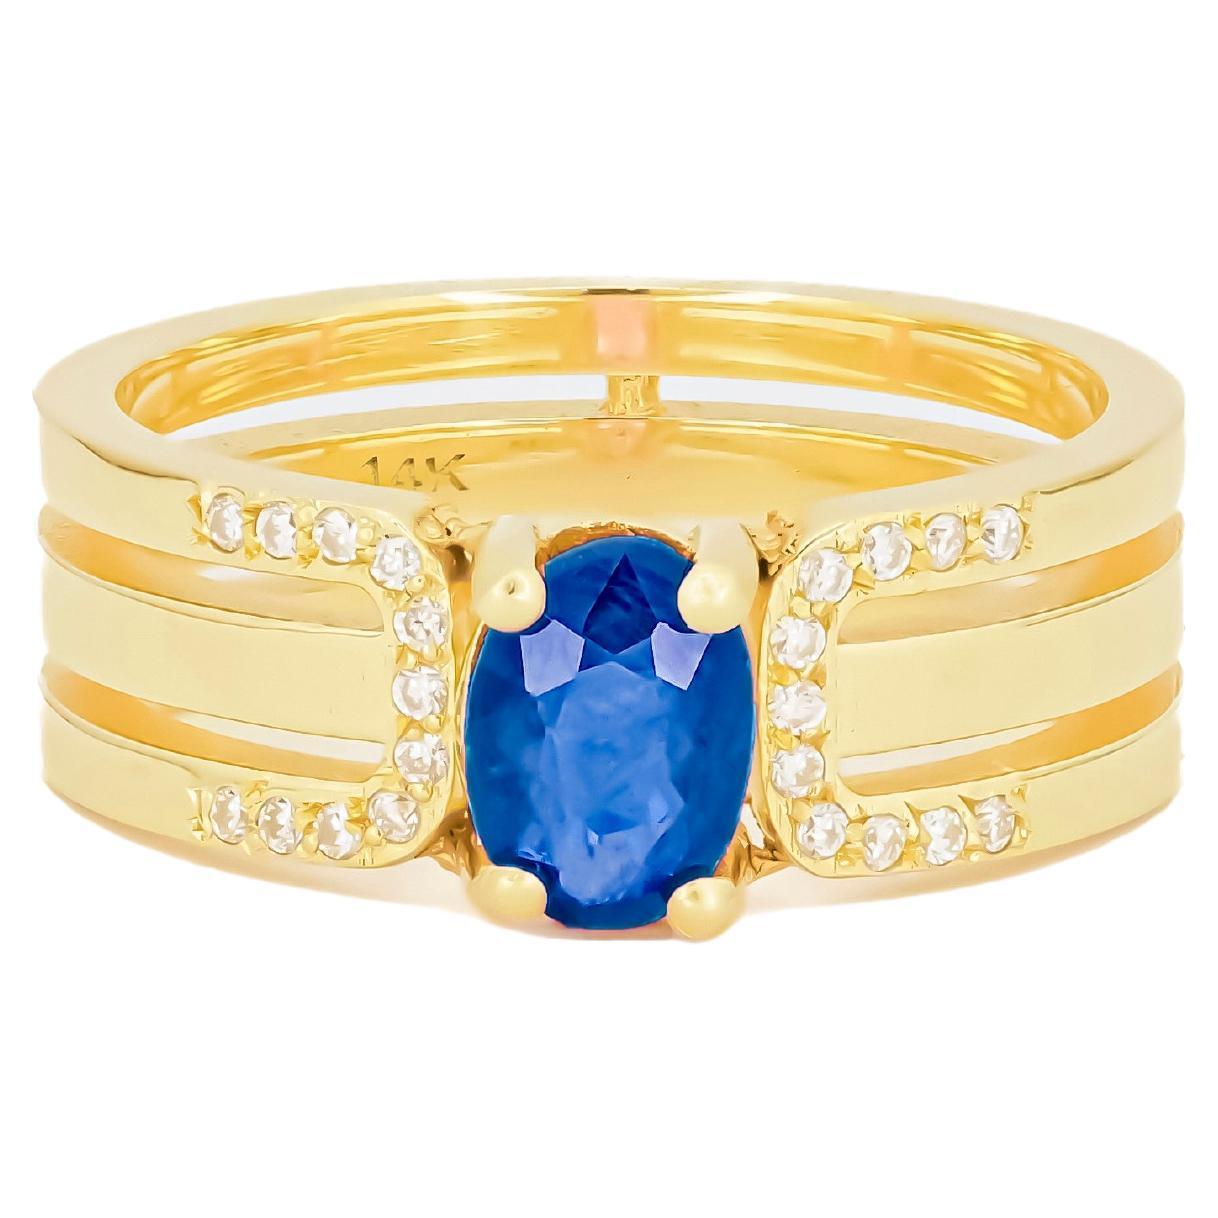 14 K Gold Mens Ring with Sapphire.  For Sale